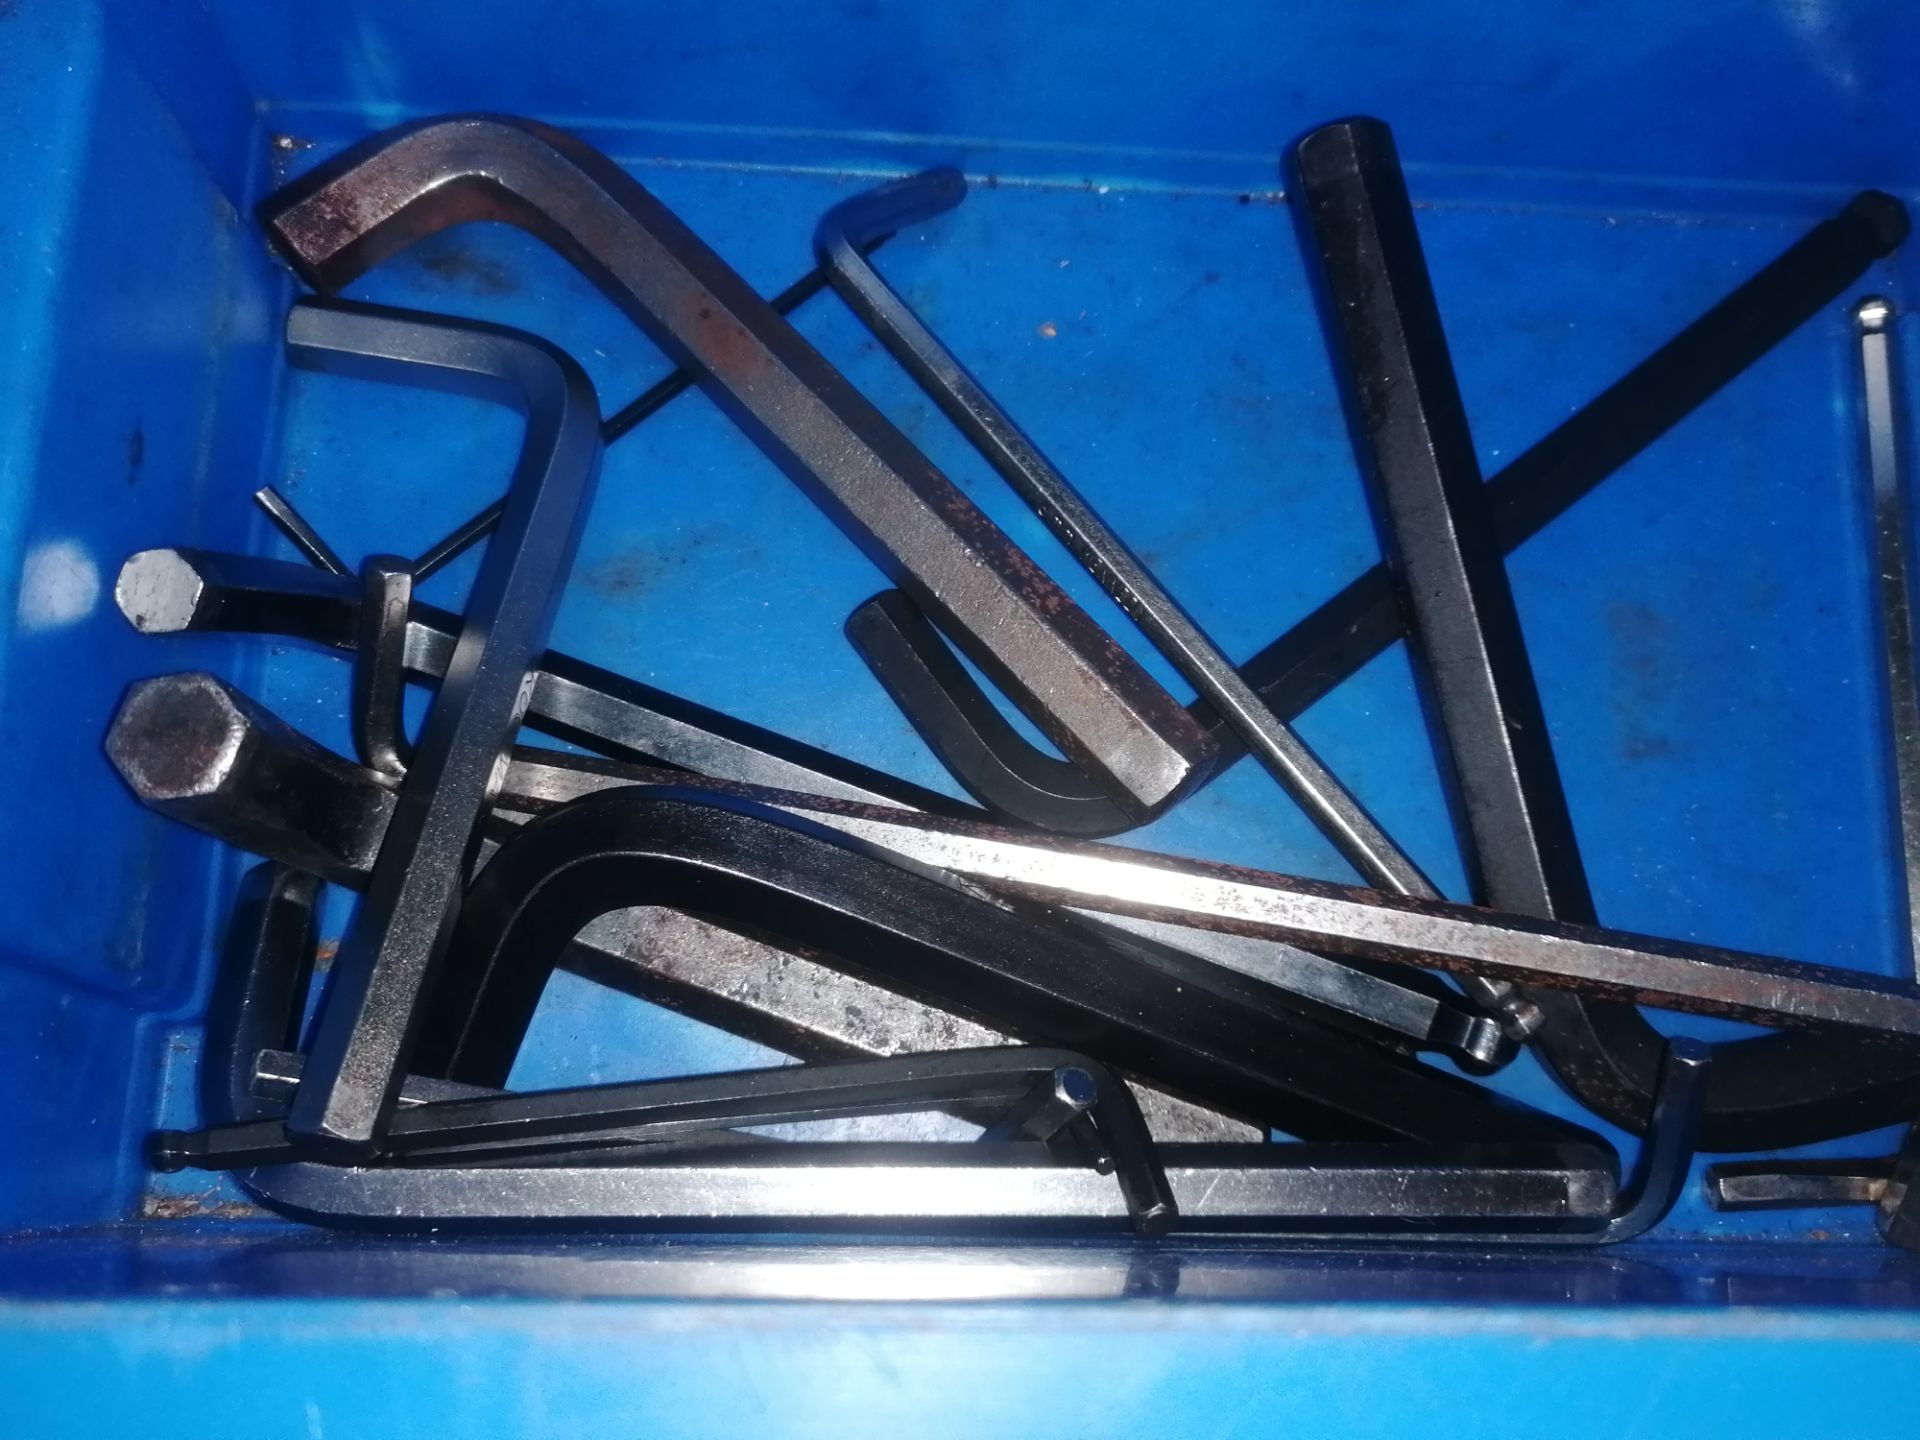 Various Allen Keys & Torque Keys (Please Note: Plastic Container Boxes Are Not Included) - Image 10 of 11